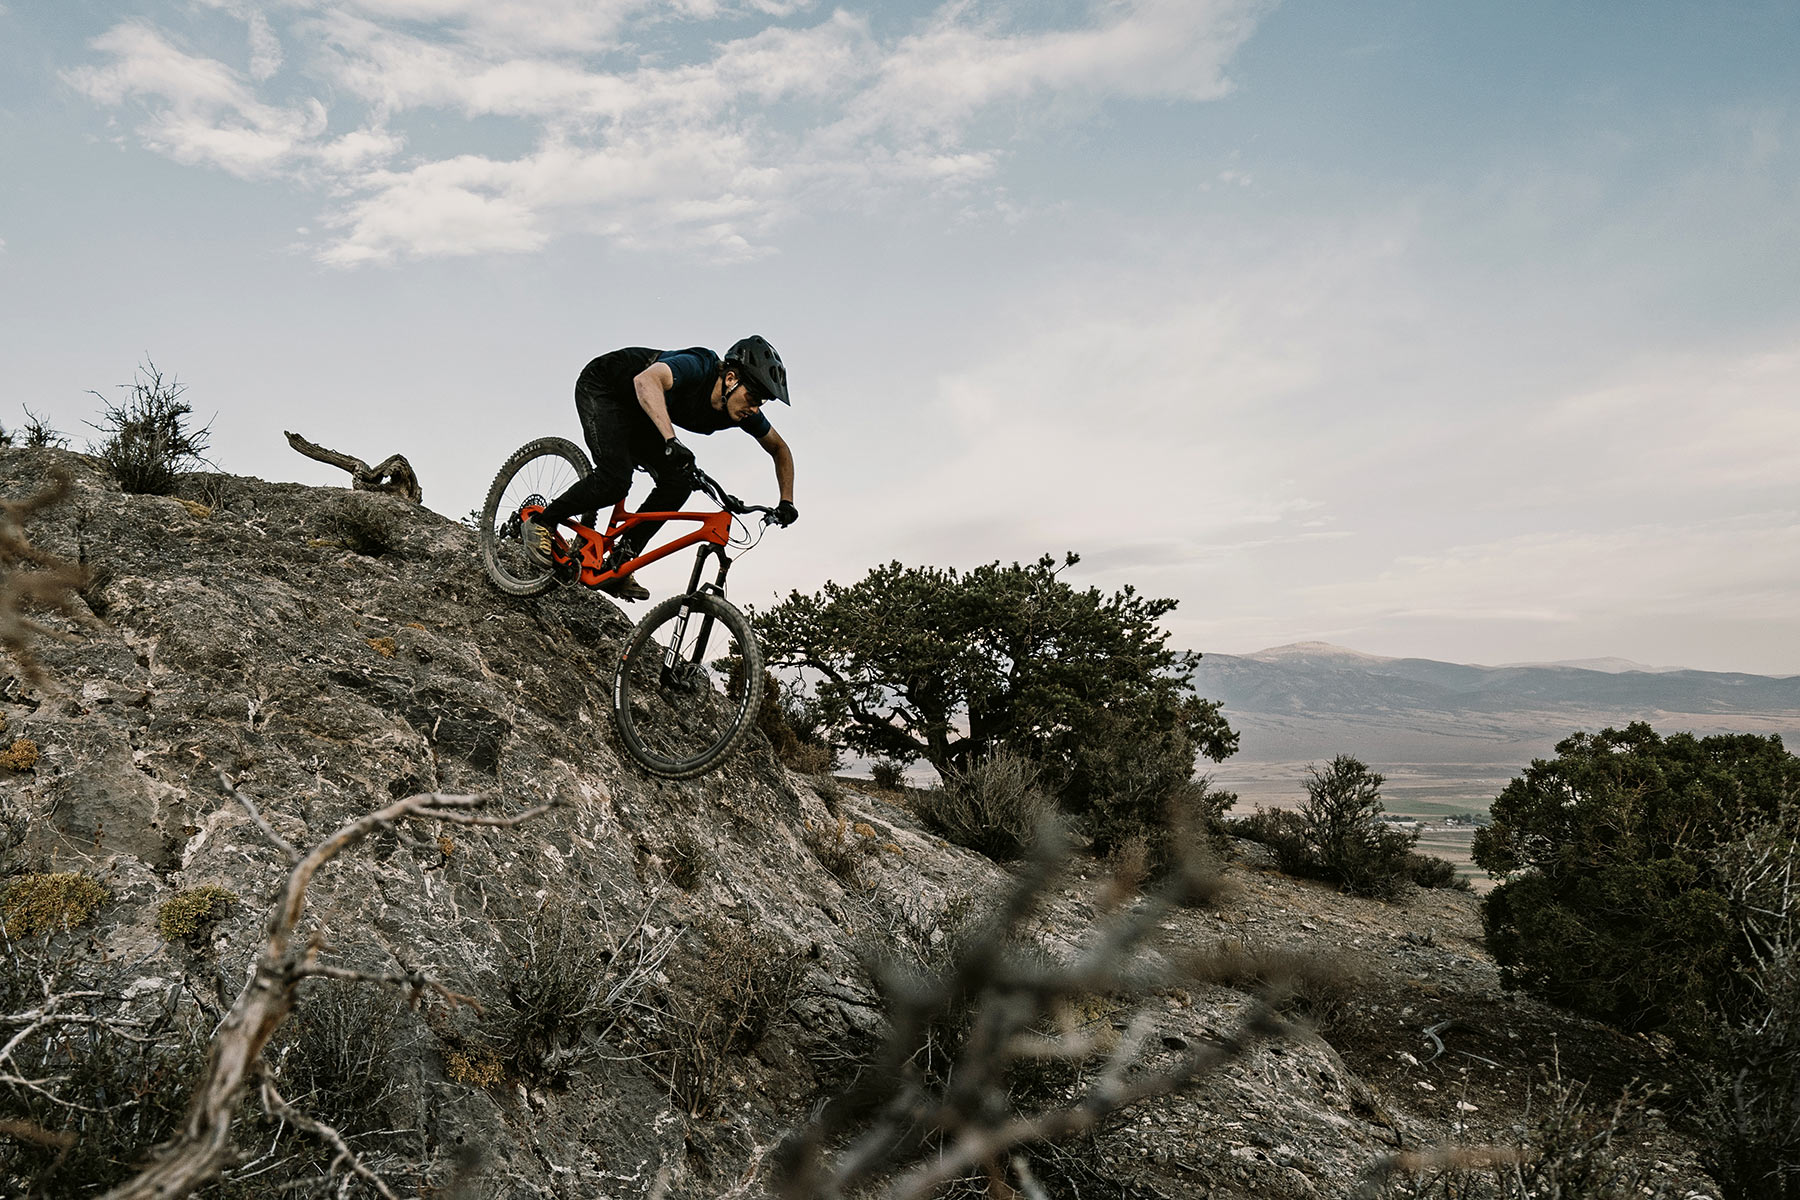 Grant Funding to Boost Ely, Nevada Mountain Biking